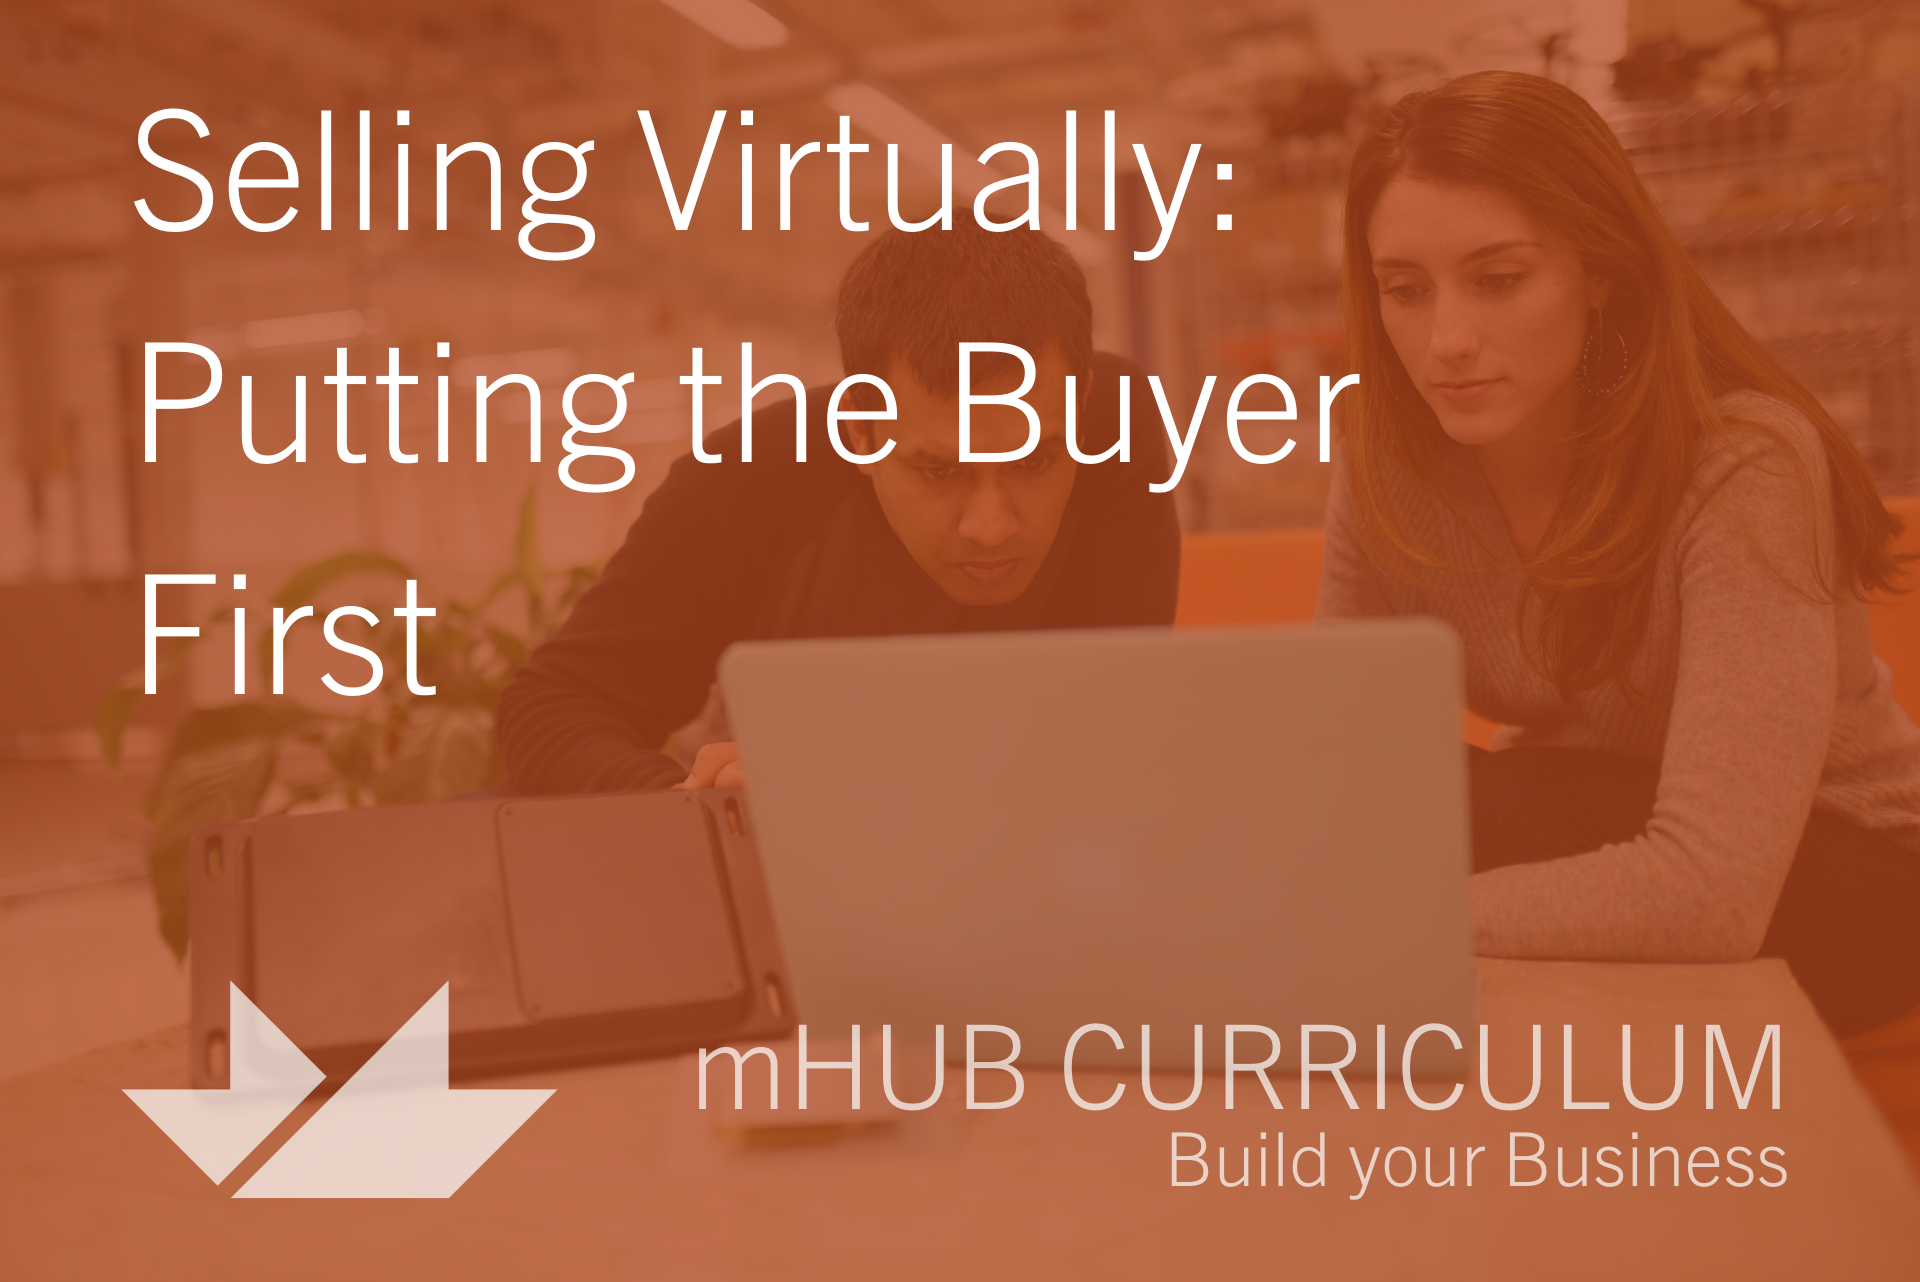 Selling Virtually: Putting the Buyer First